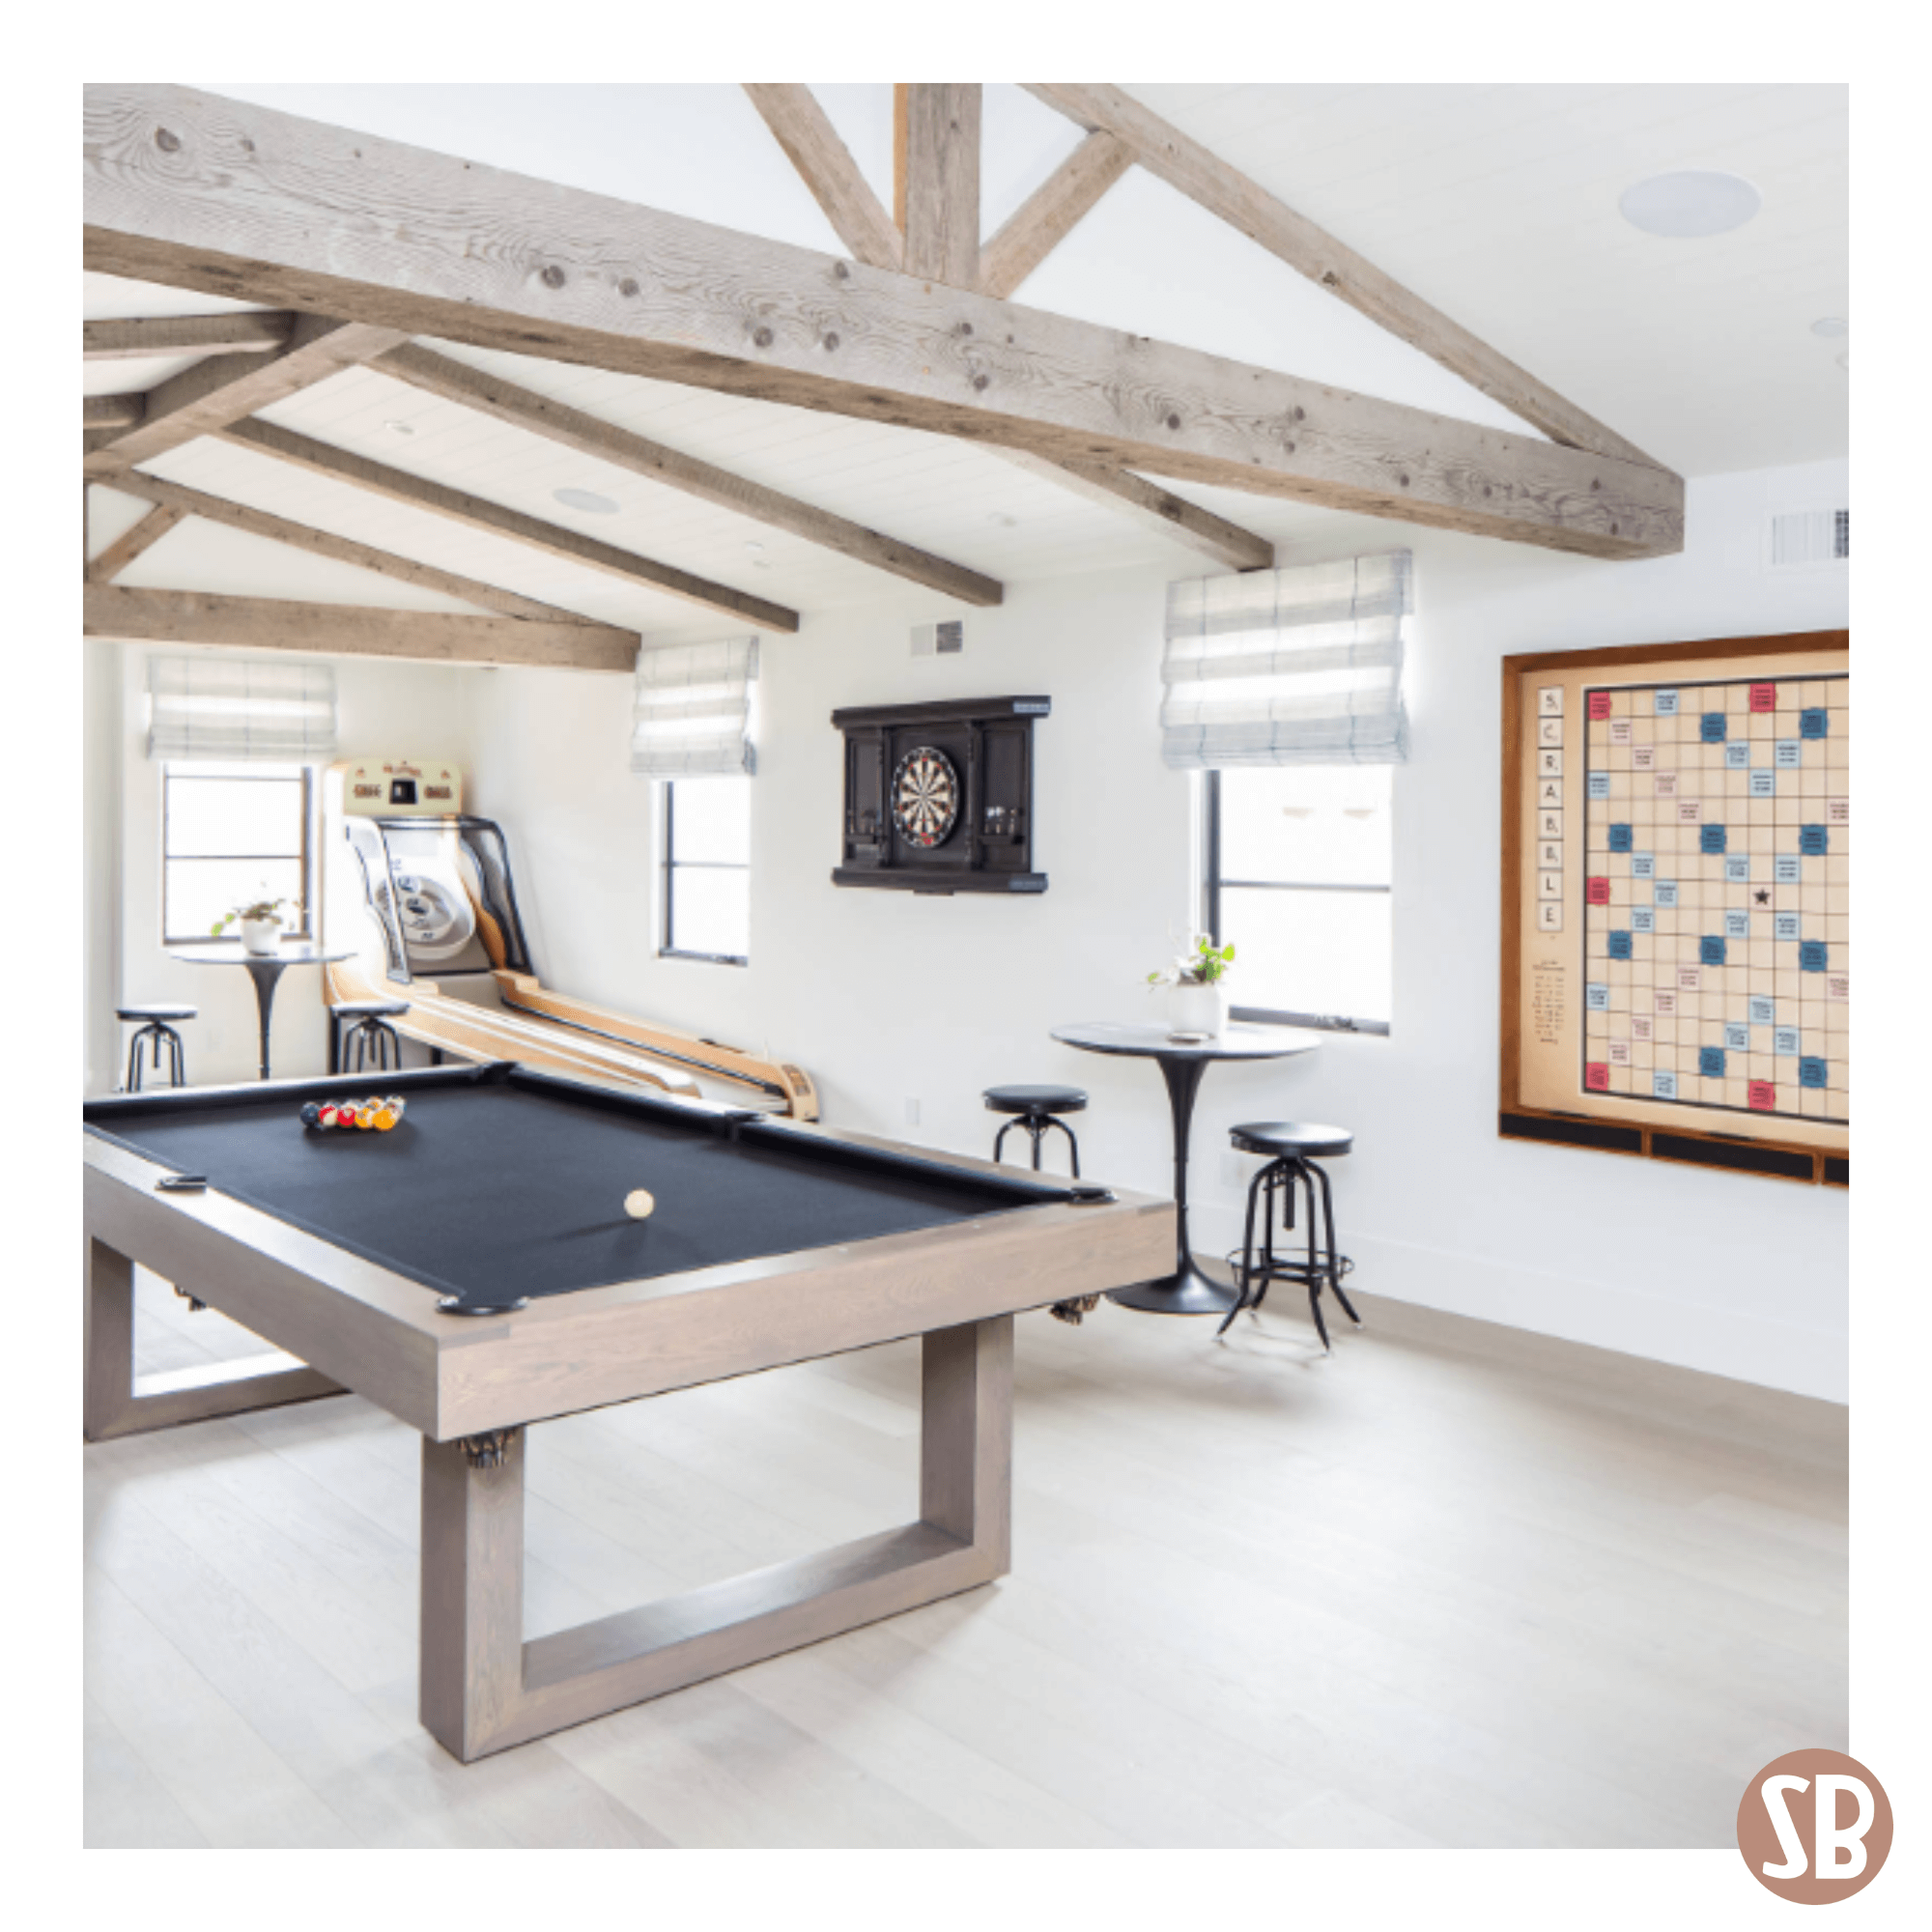 A farm house room design featuring a dart board, Scrabble table and a Skee-Ball Home Alley machine